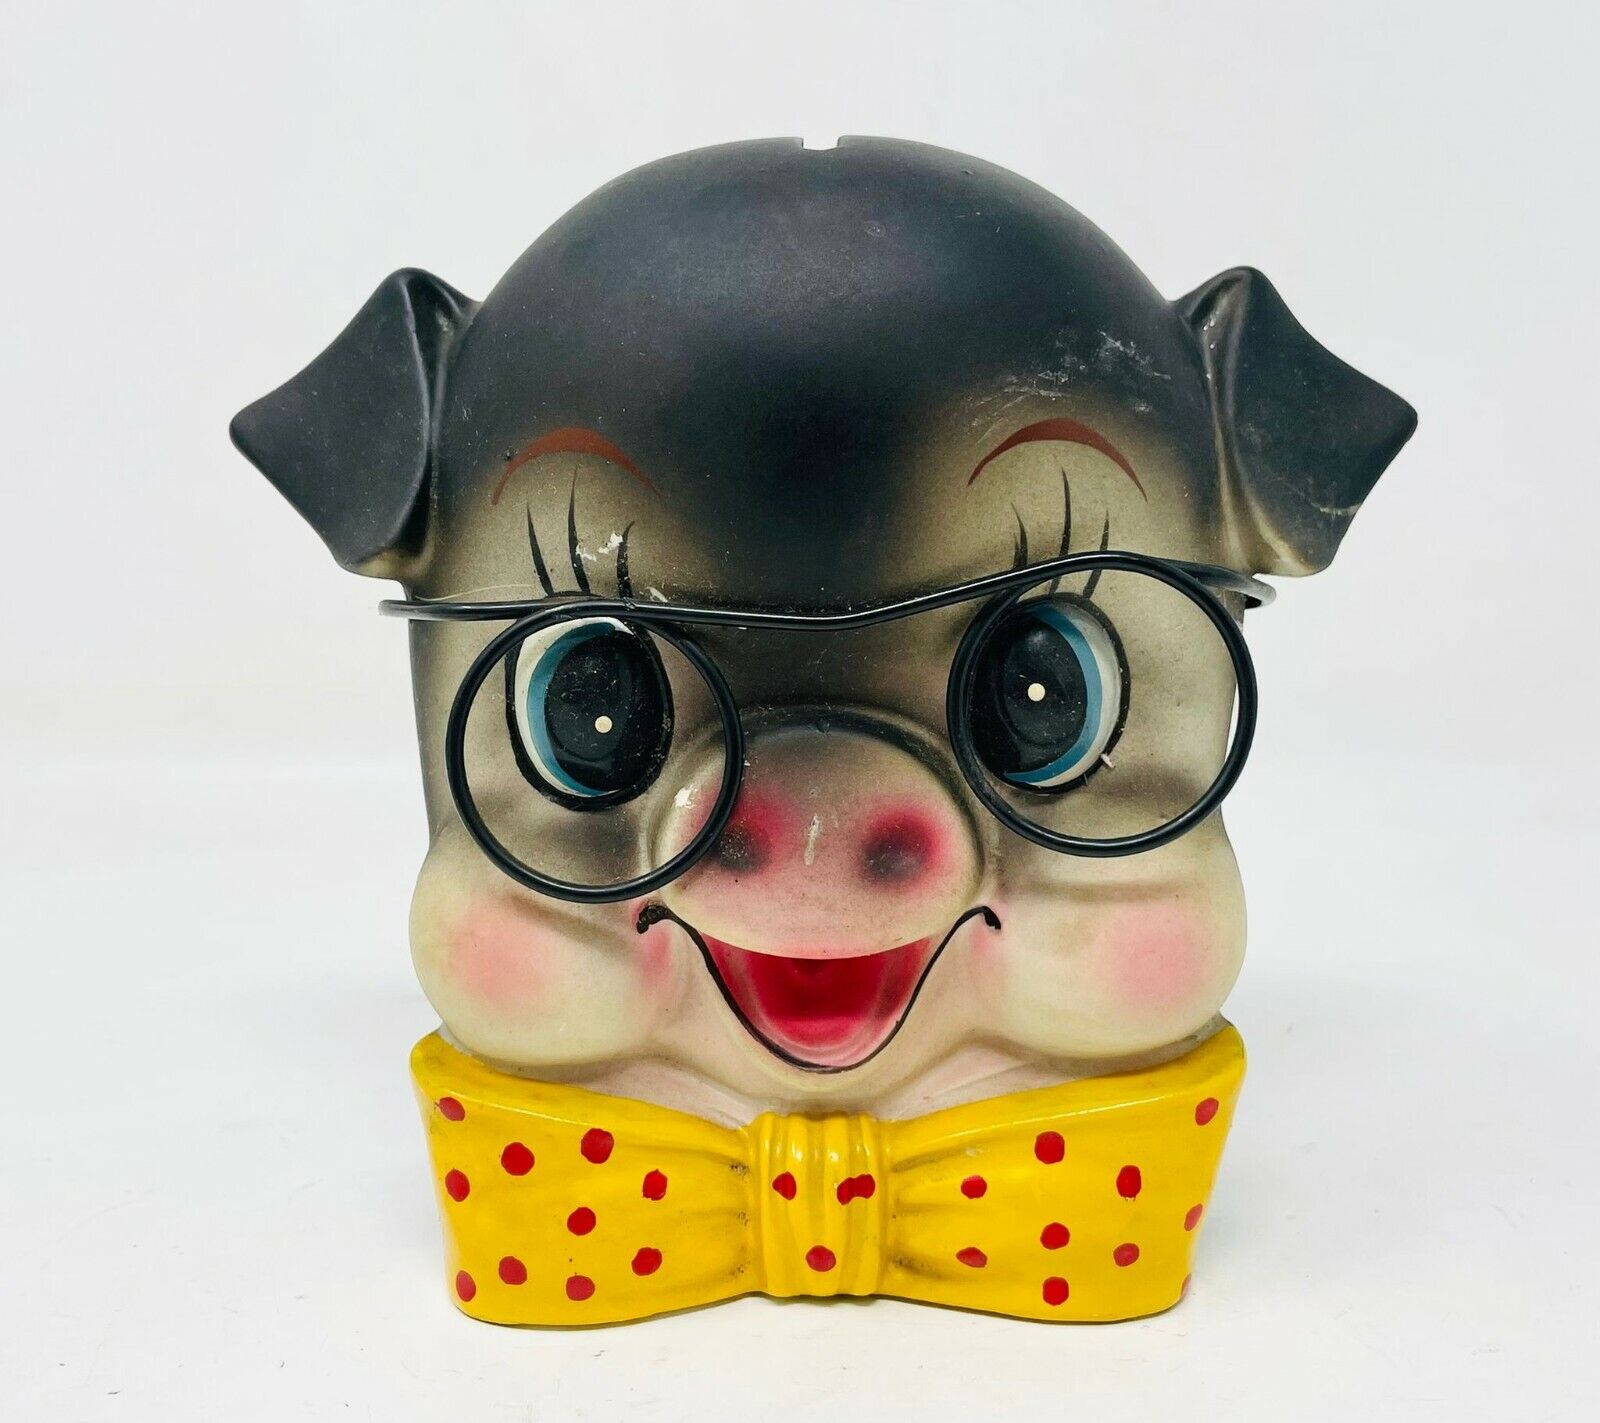 Vintage Chalkware Pig with Glasses Polka Dot Bow Tie Piggy Bank 5-1/2”x6-1/2”x3”